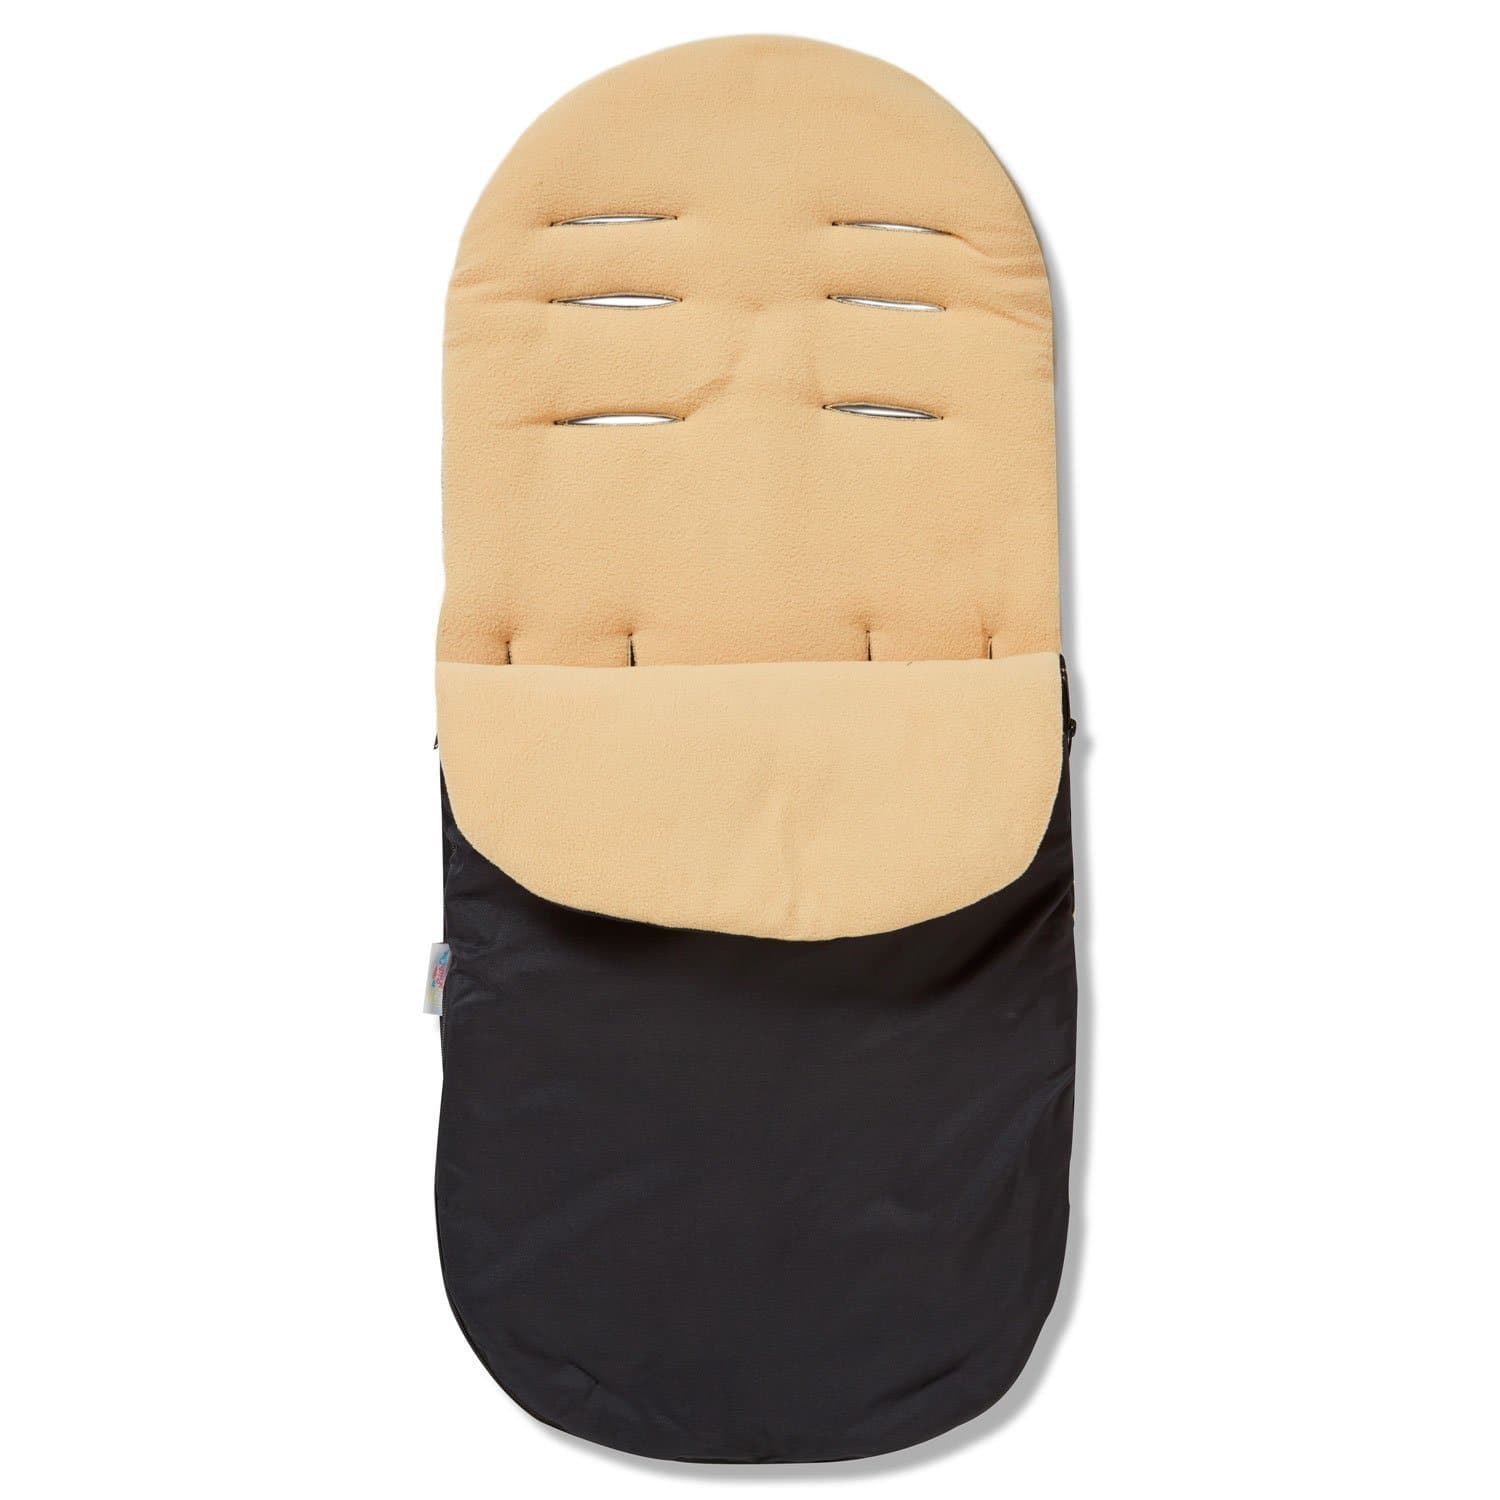 Footmuff / Cosy Toes Compatible with Baby Trend - Sand / Fits All Models | For Your Little One